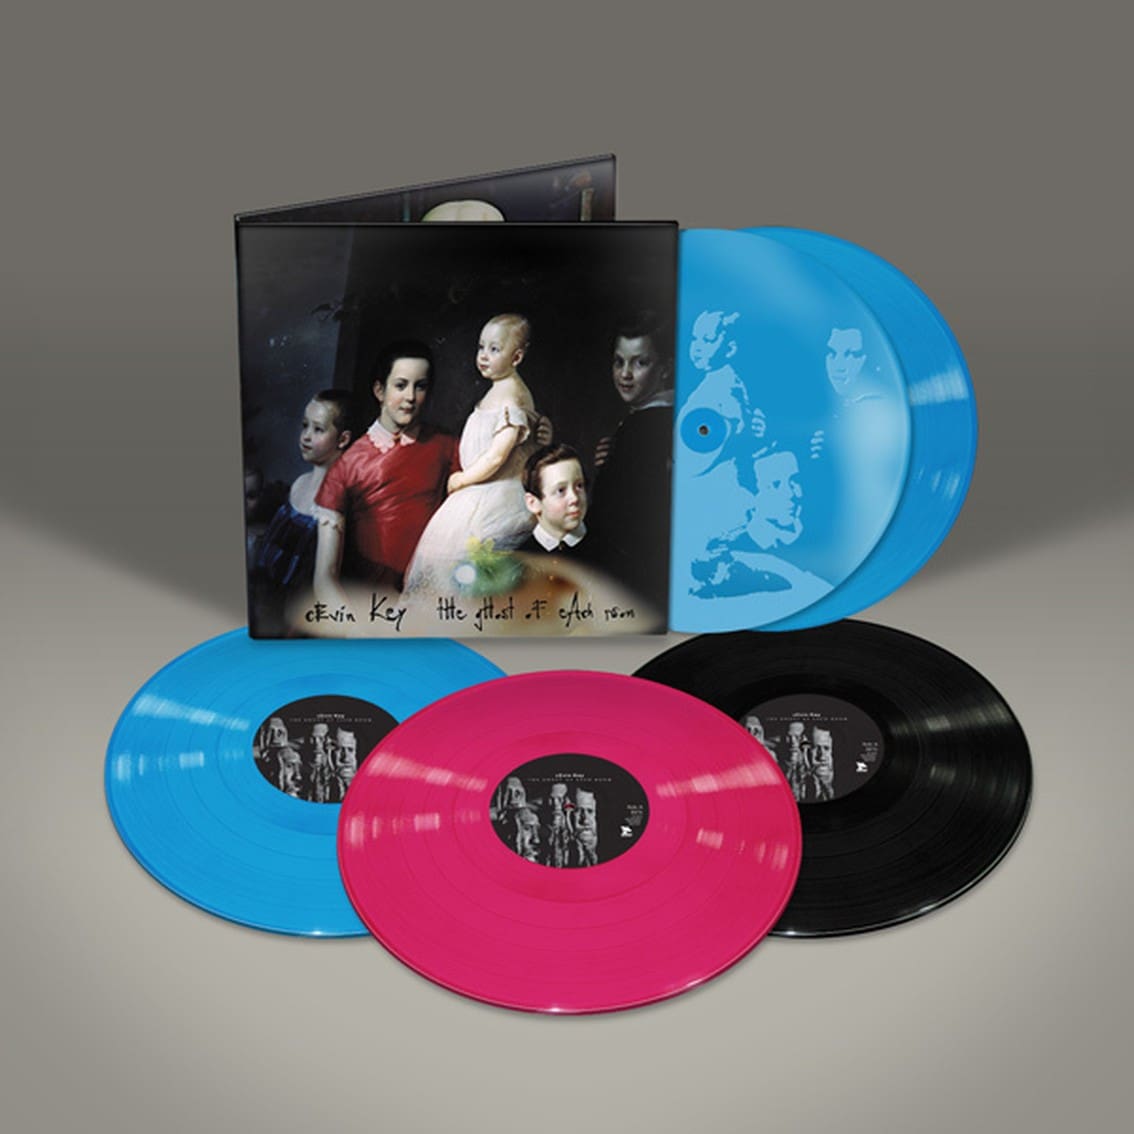 Cevin Key's 'The Ghost of Each Room' available in a 3x 2LP vinyl package